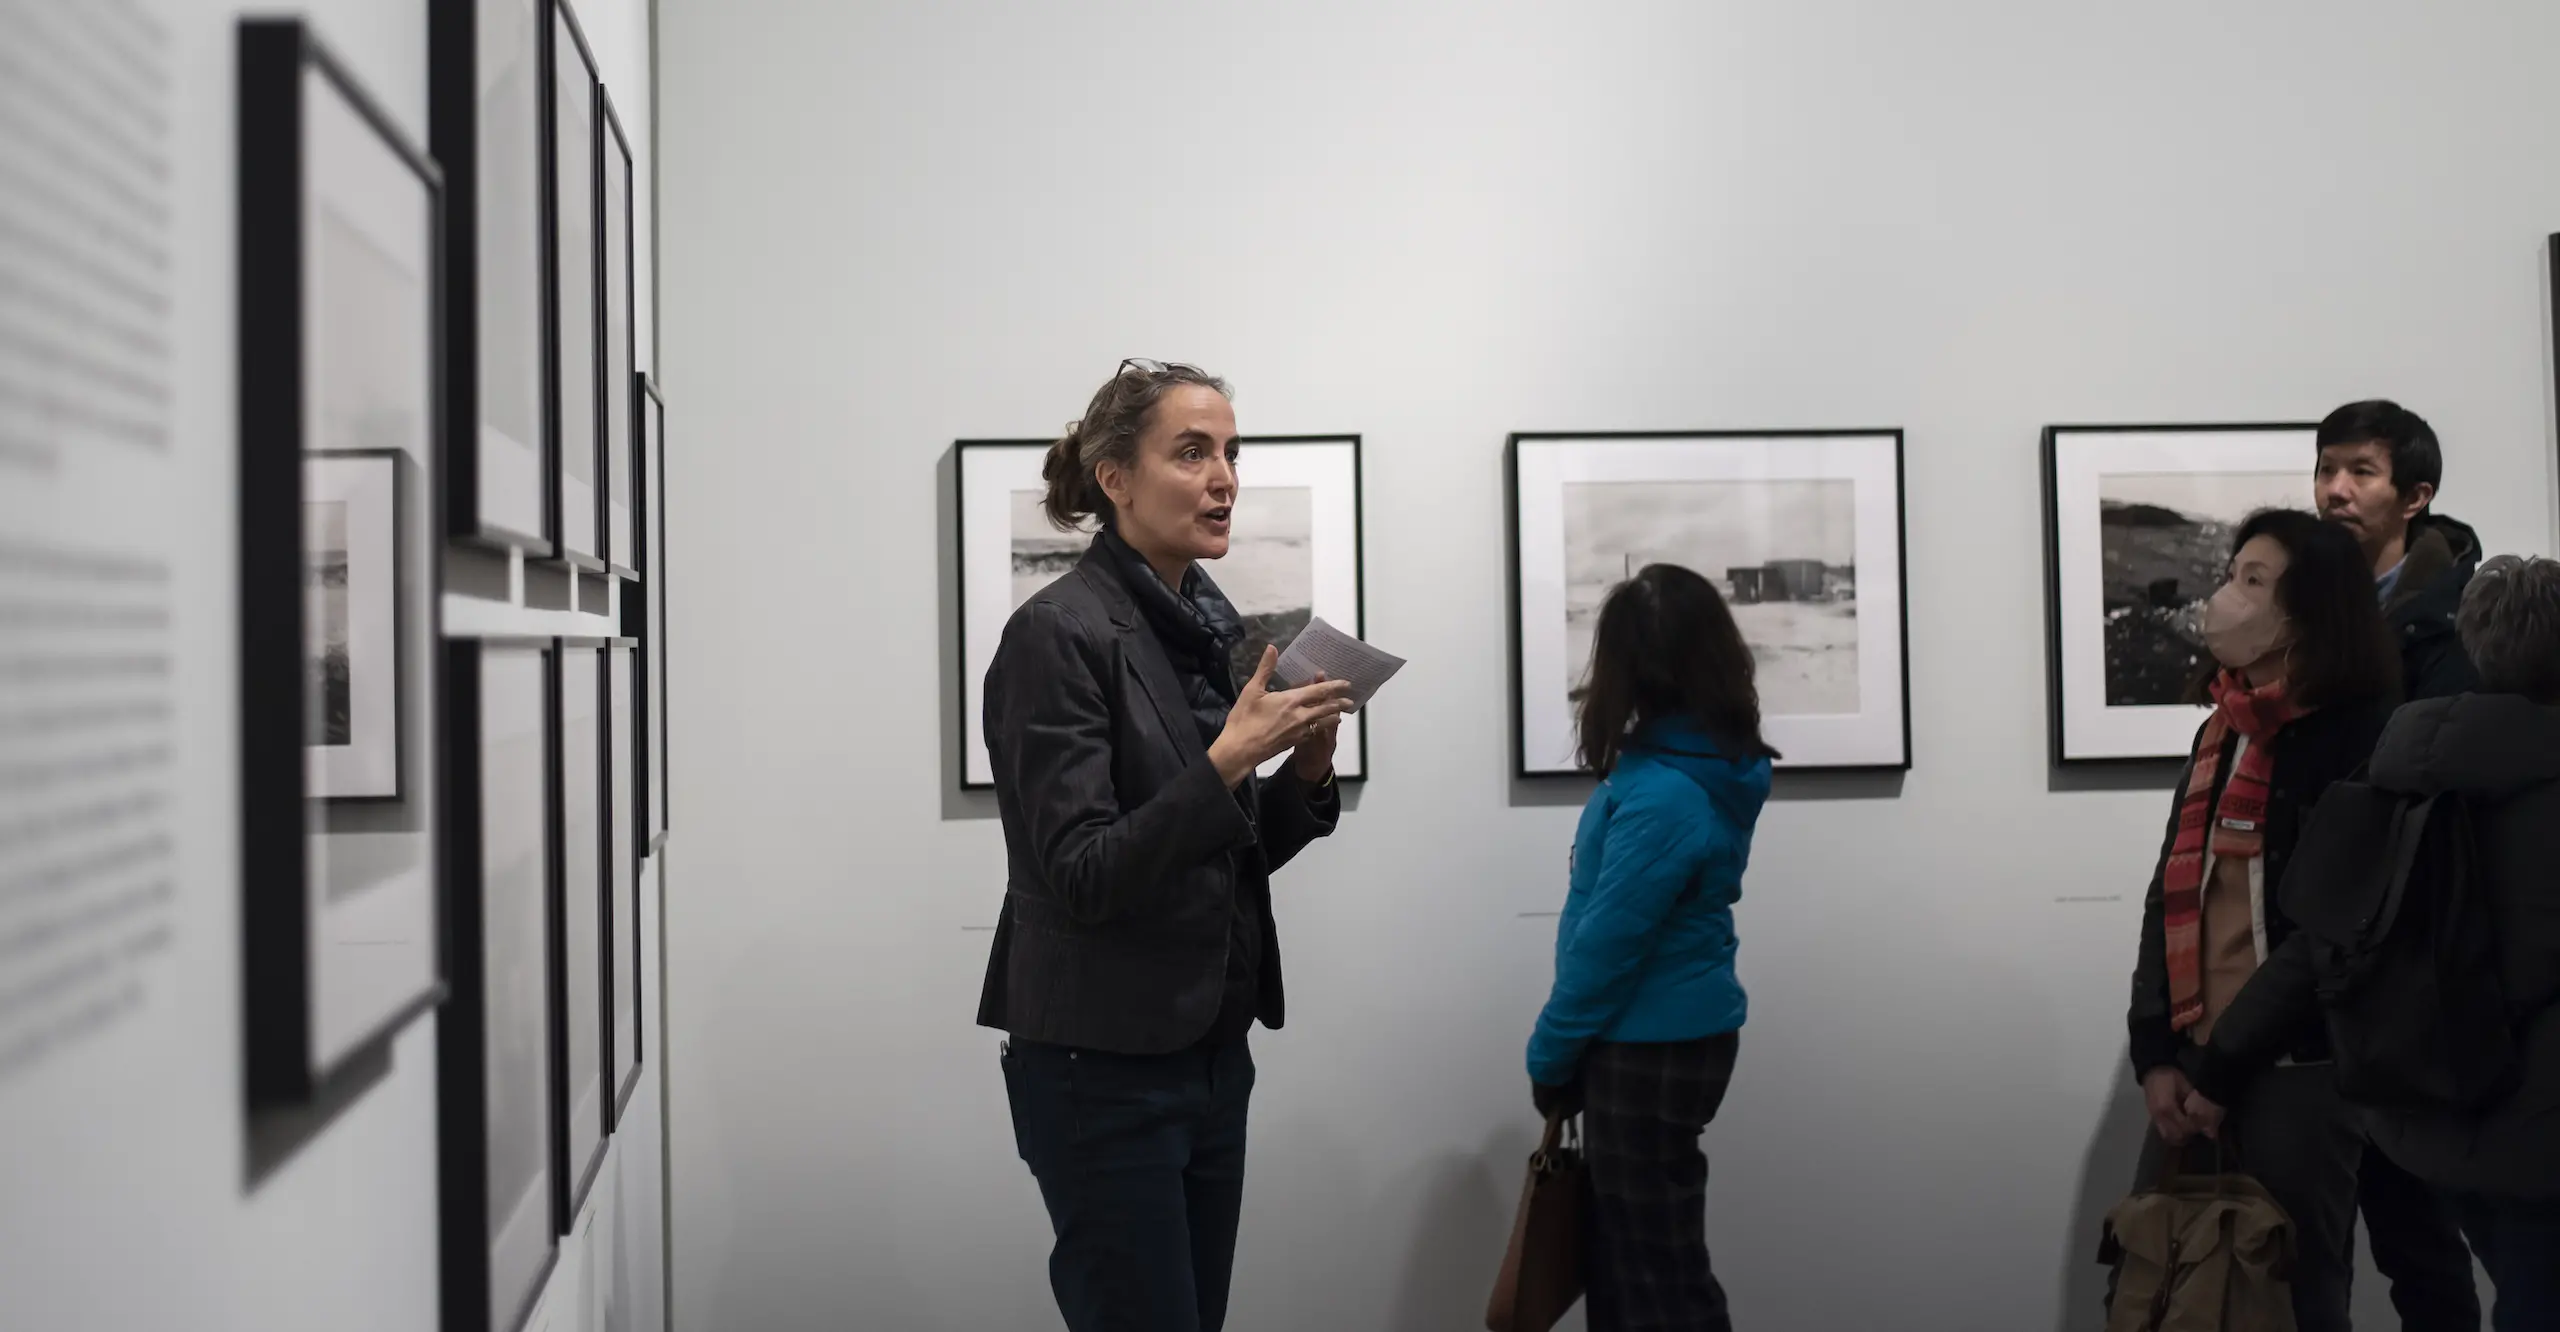 A person talking to a group of people in a photography exhibition.